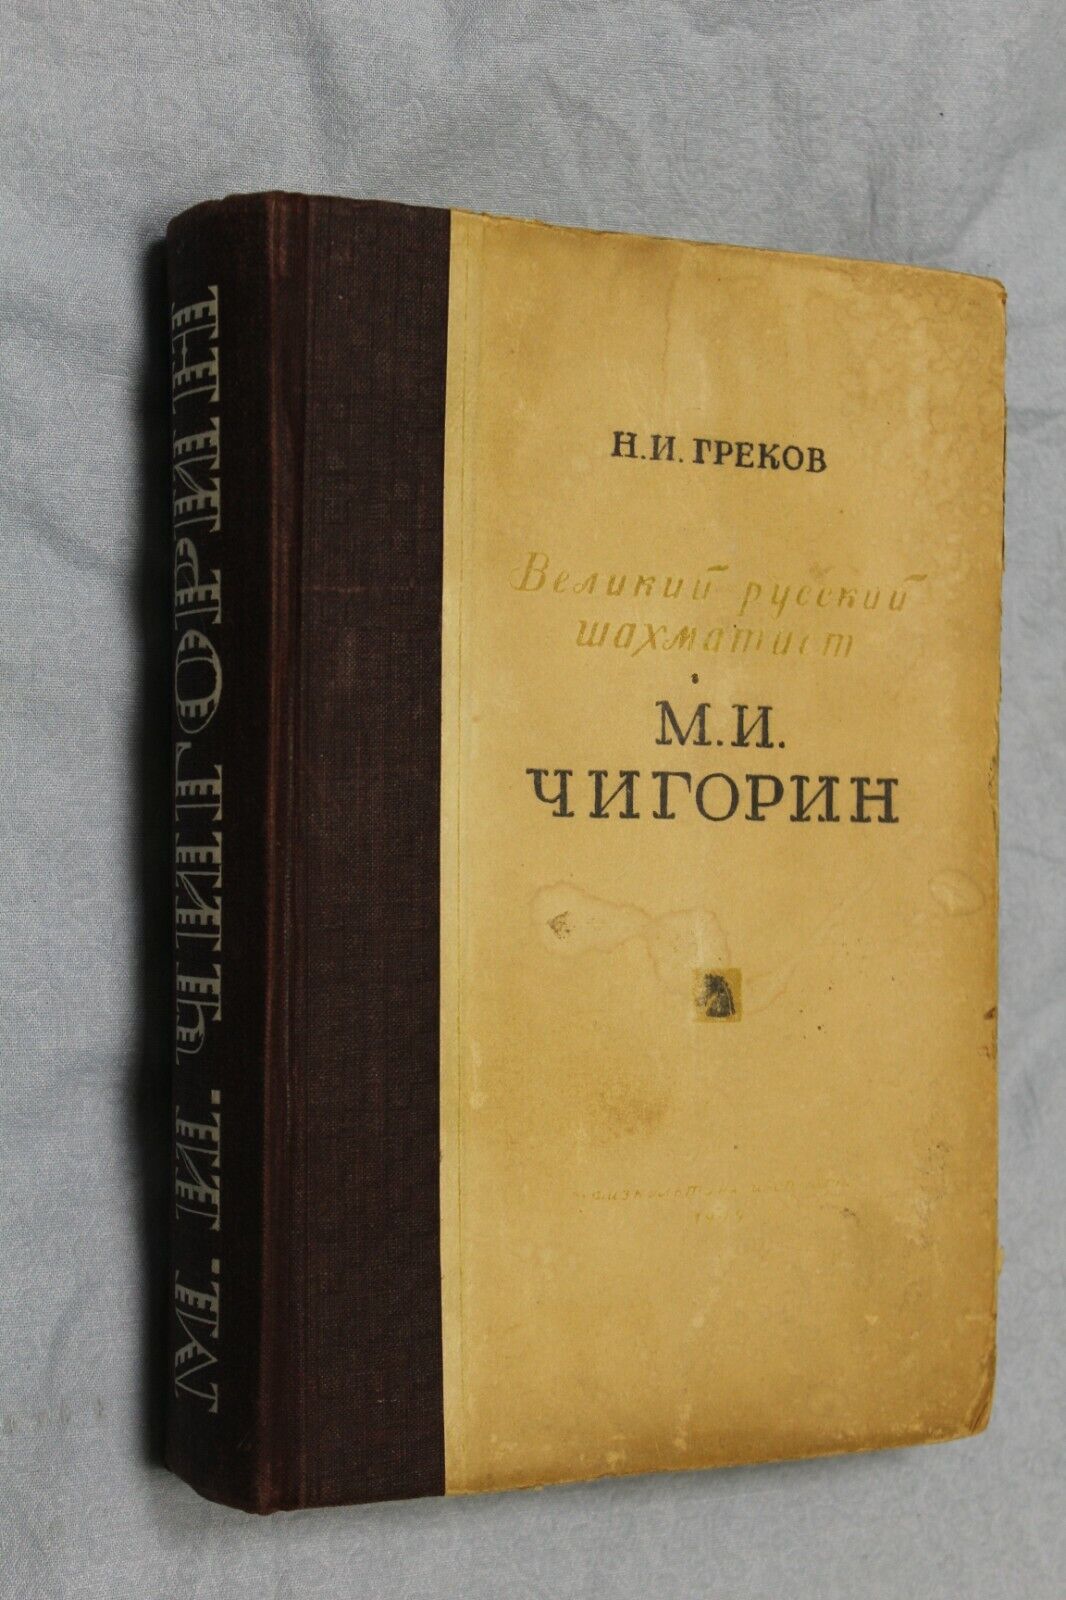 11091.Chess book: M. Chigorin the great Russian Сhess Player, Moscow 1949